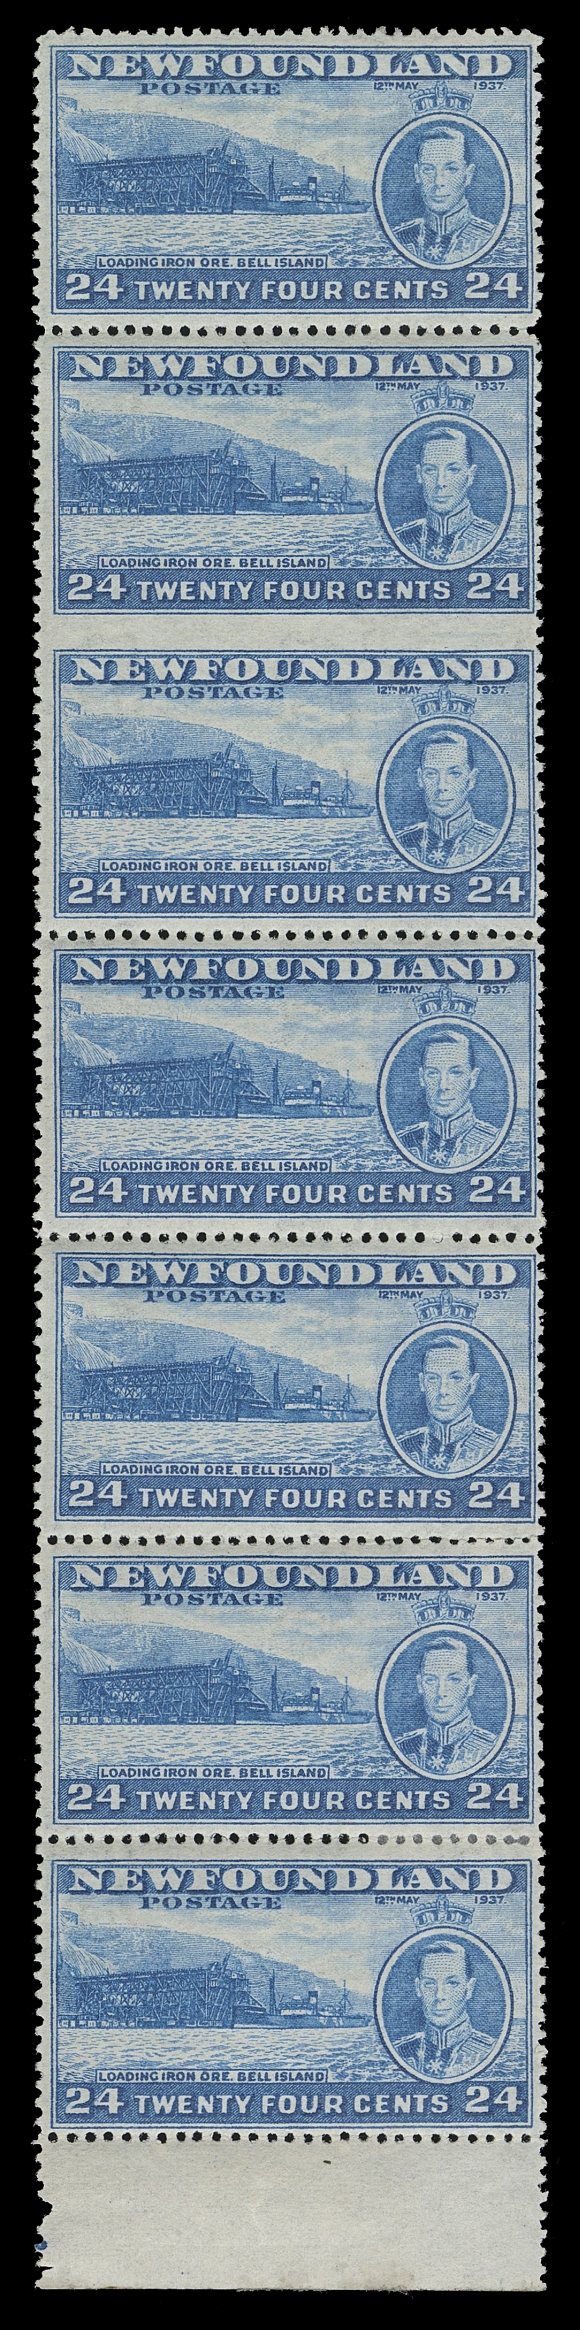 THE AFAB COLLECTION - NEWFOUNDLAND 1897-1947 ISSUES  241a,Mint vertical strip of seven with margin at foot, IMPERFORATE HORIZONTALLY between second and third stamps in error, top stamp and lower pair LH, the key imperforate between pair is NH, Fine and rare